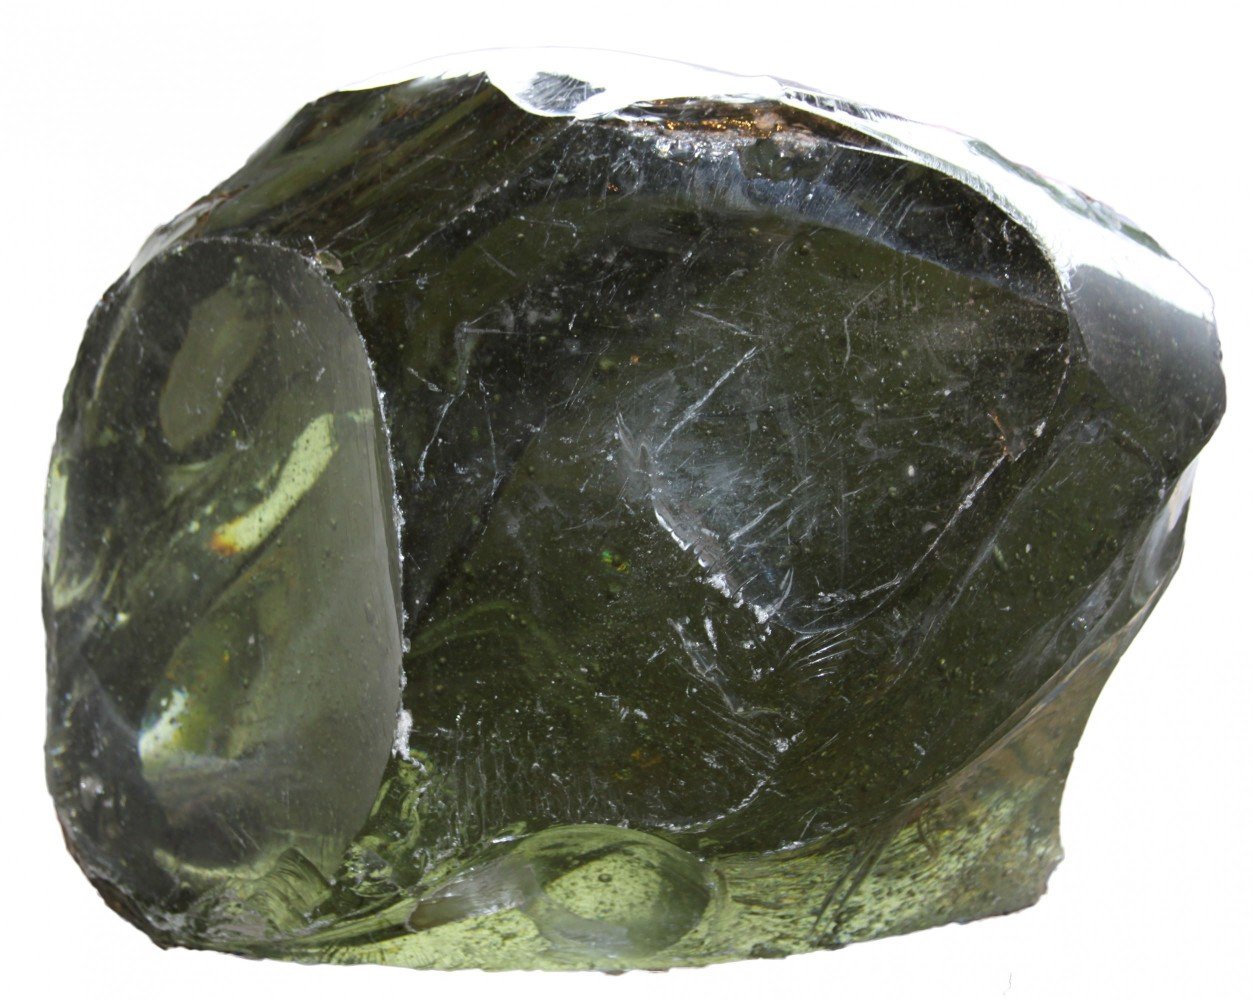 A Very Large Pair of Glass Rocks